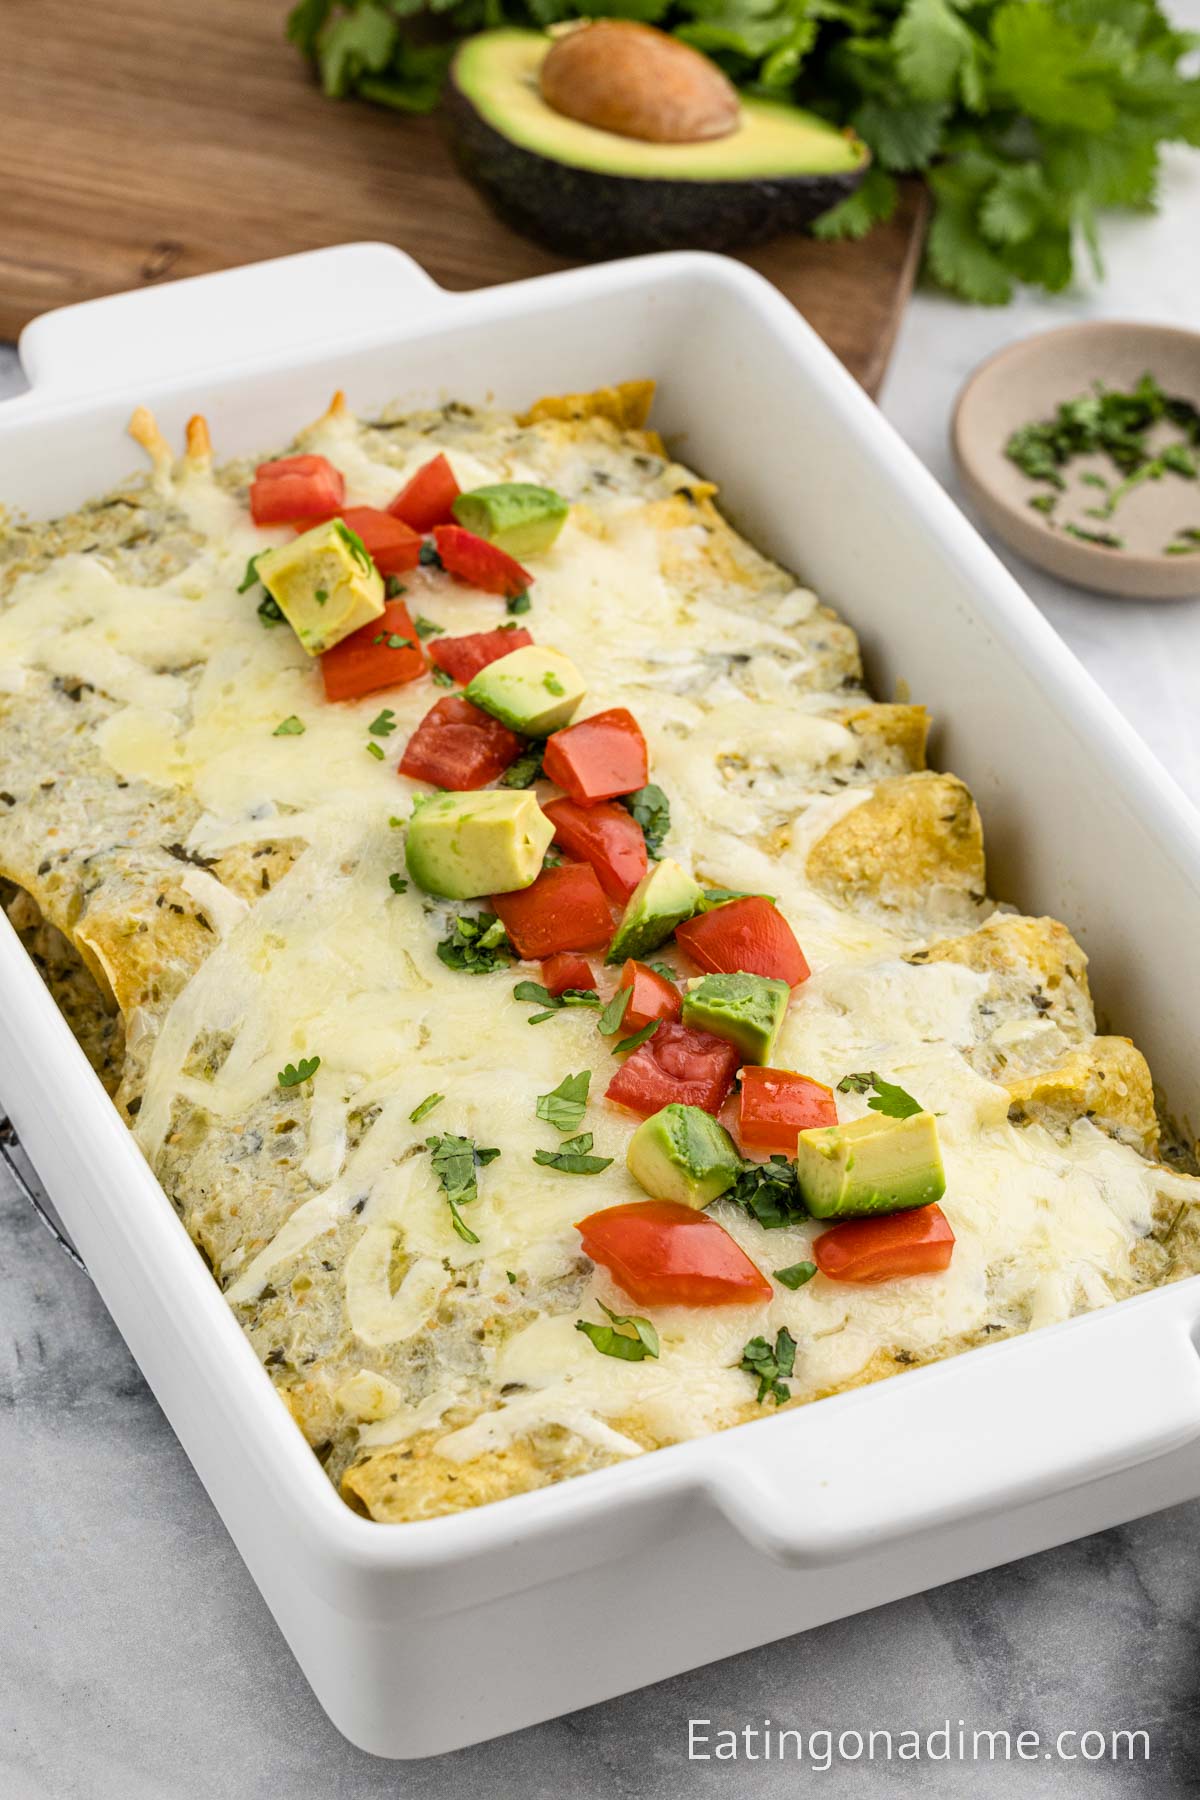 Chicken enchiladas in a baking dish topped with diced avocado and diced tomatoes